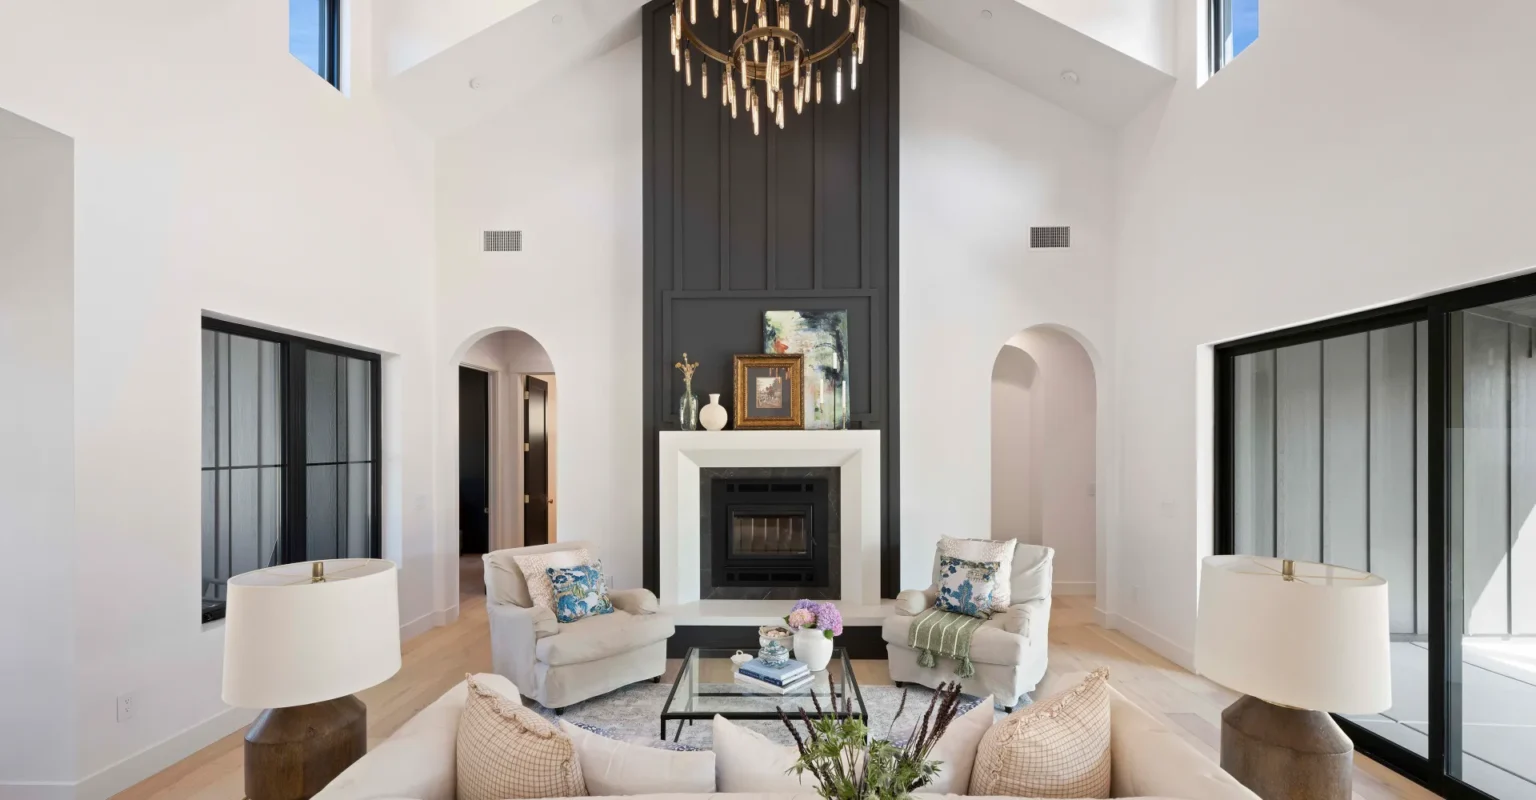 Interior of great room in modern custom home, showing vaulted ceilings and clerestory windows.